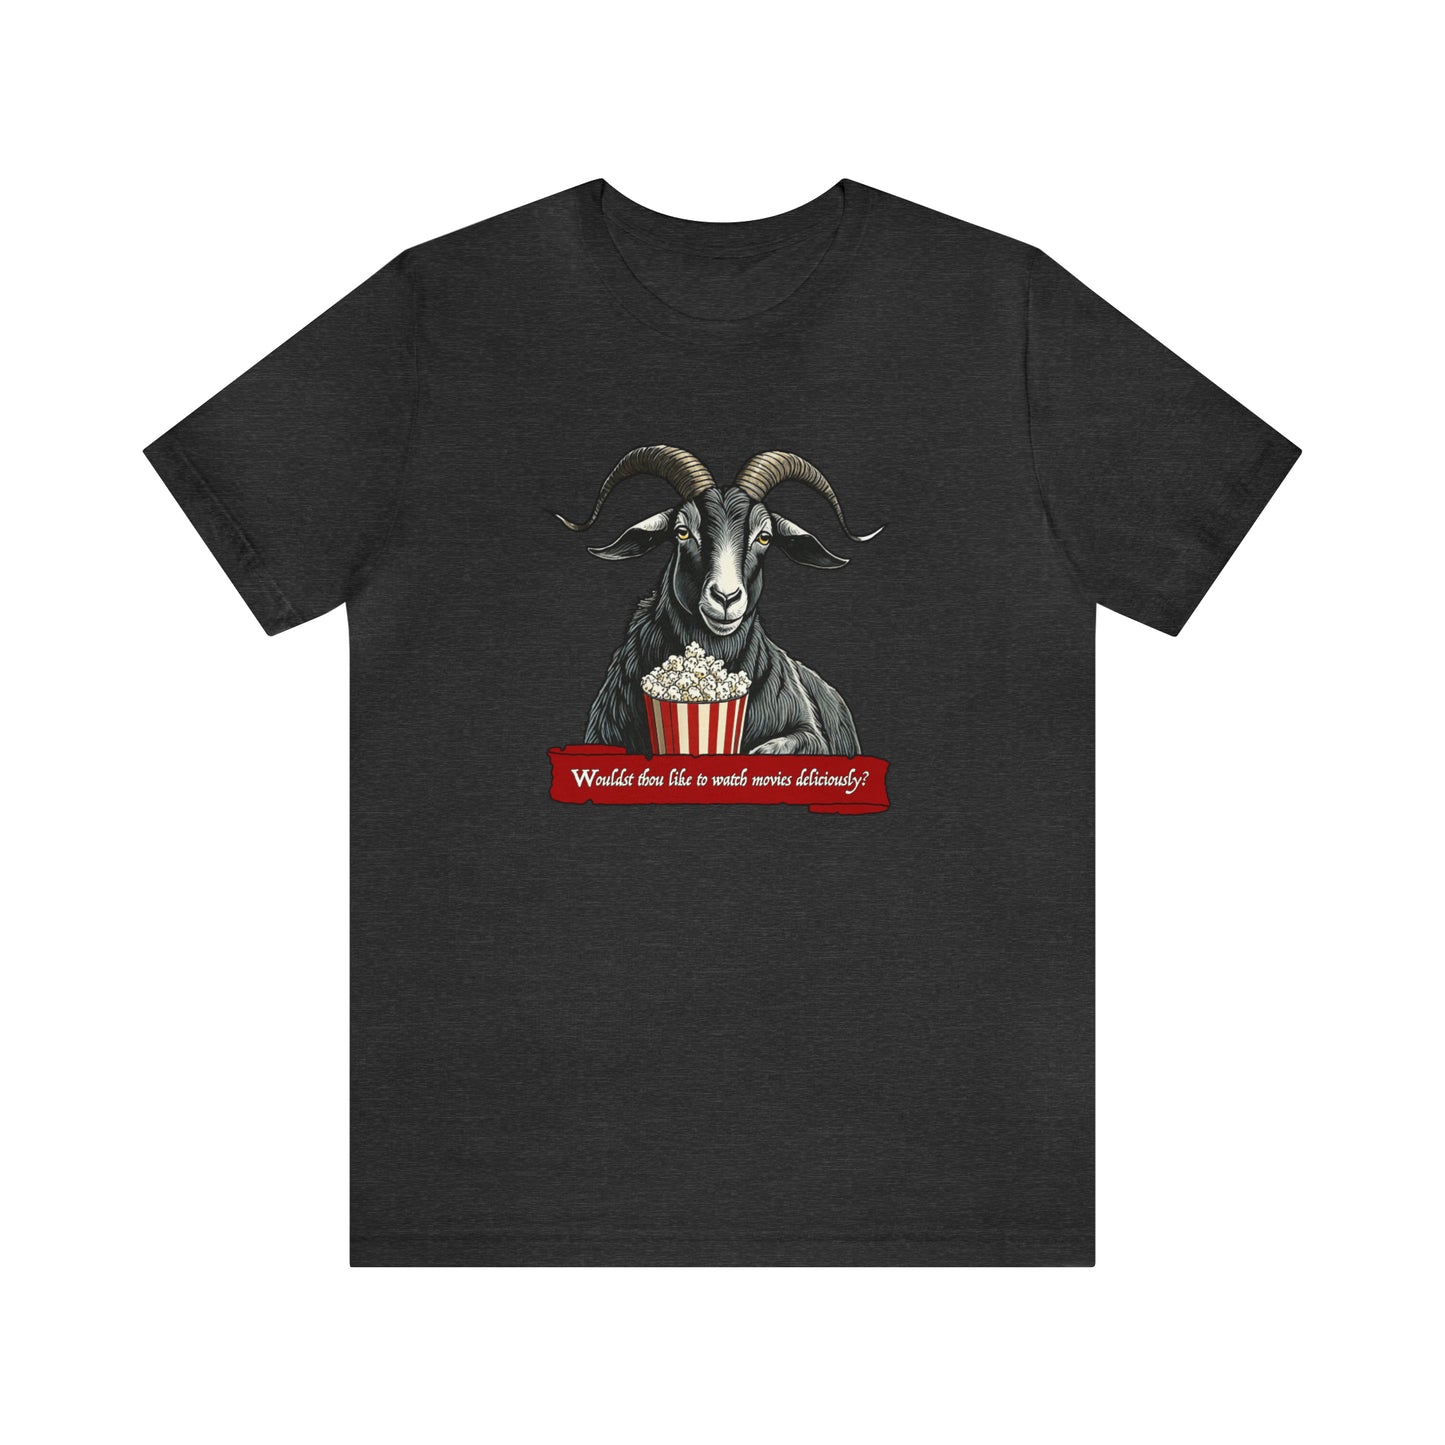 The Witch's Movie Coven Popcorn Movie Unisex T-Shirt